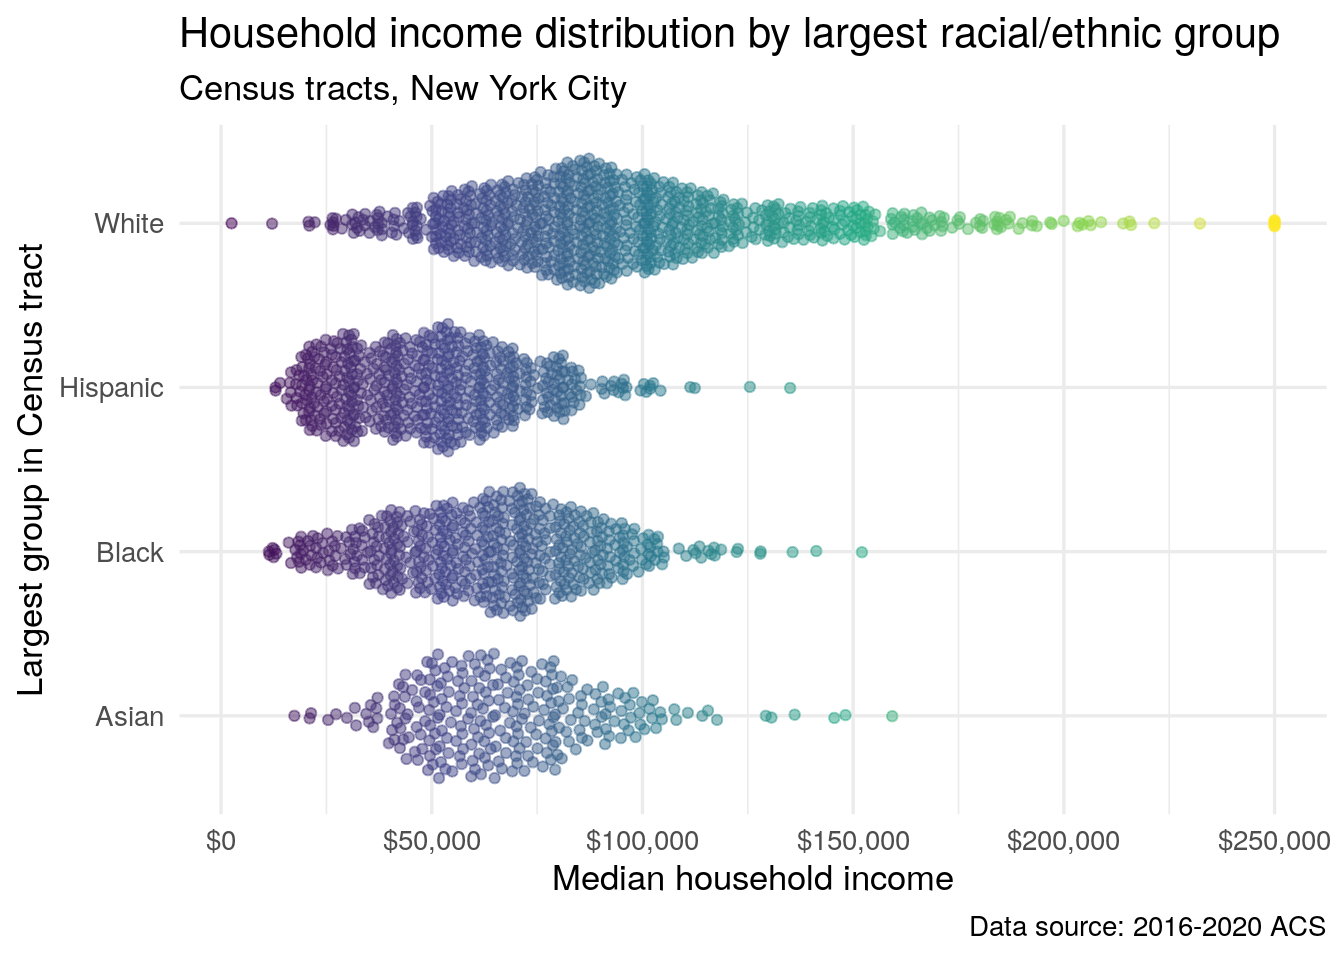 A beeswarm plot of median household income by most common racial or ethnic group, NYC Census tracts